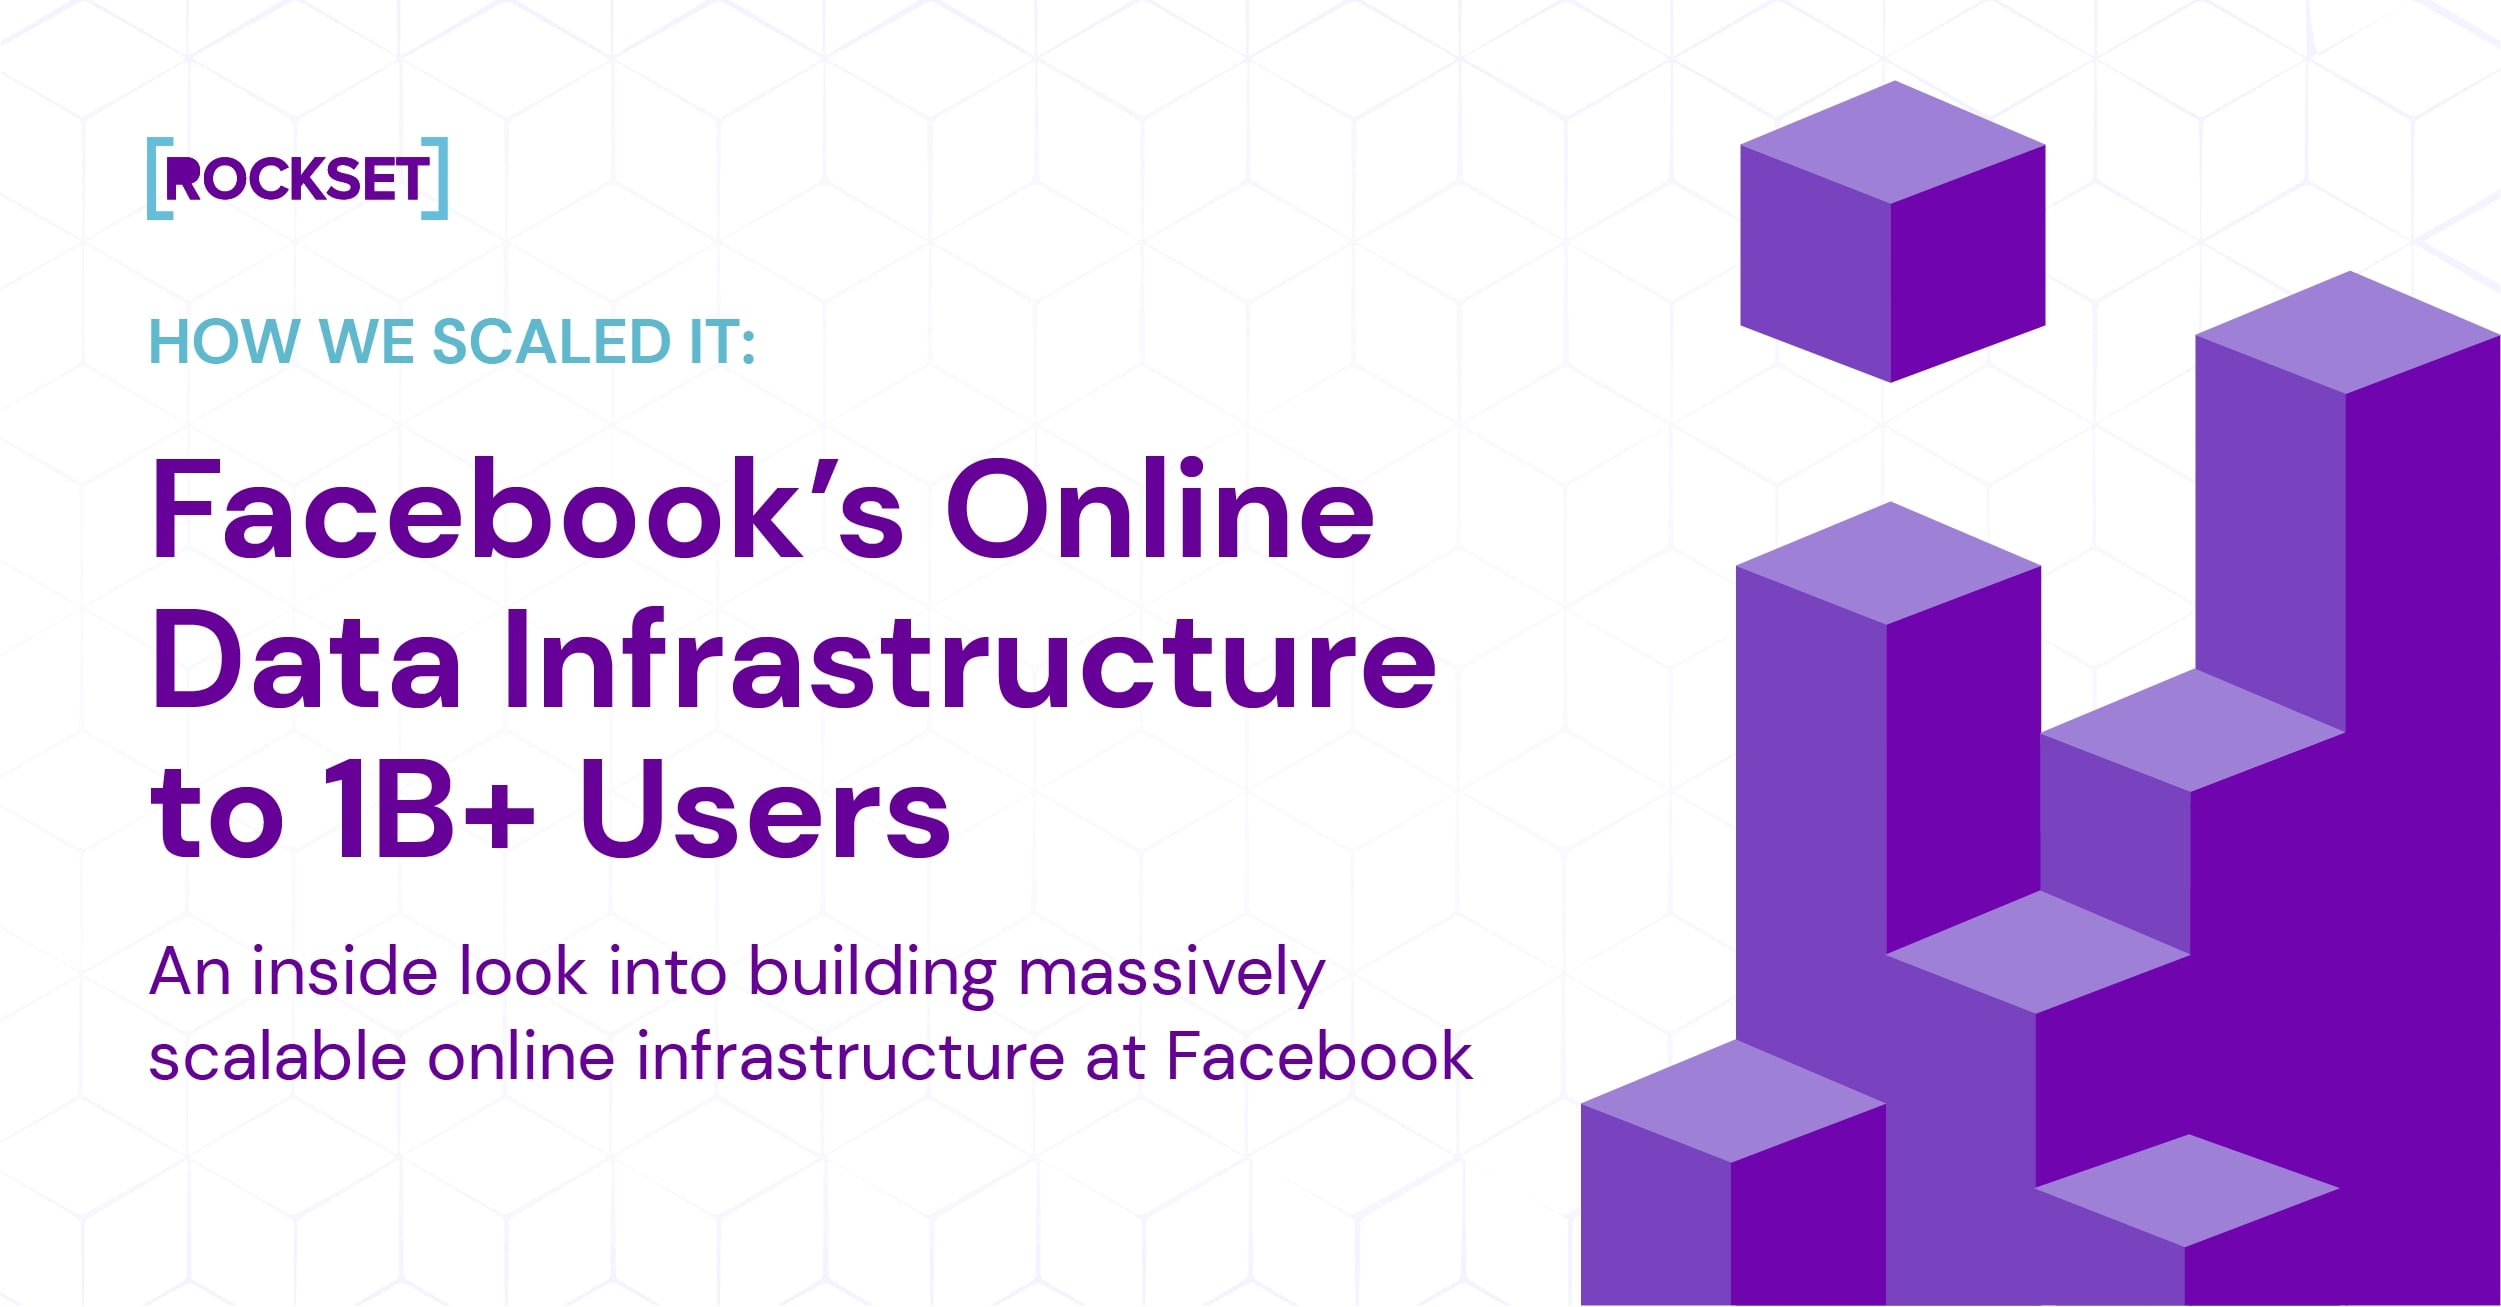 How We Scaled It: Facebook’s Online Data Infrastructure to 1B+ Users